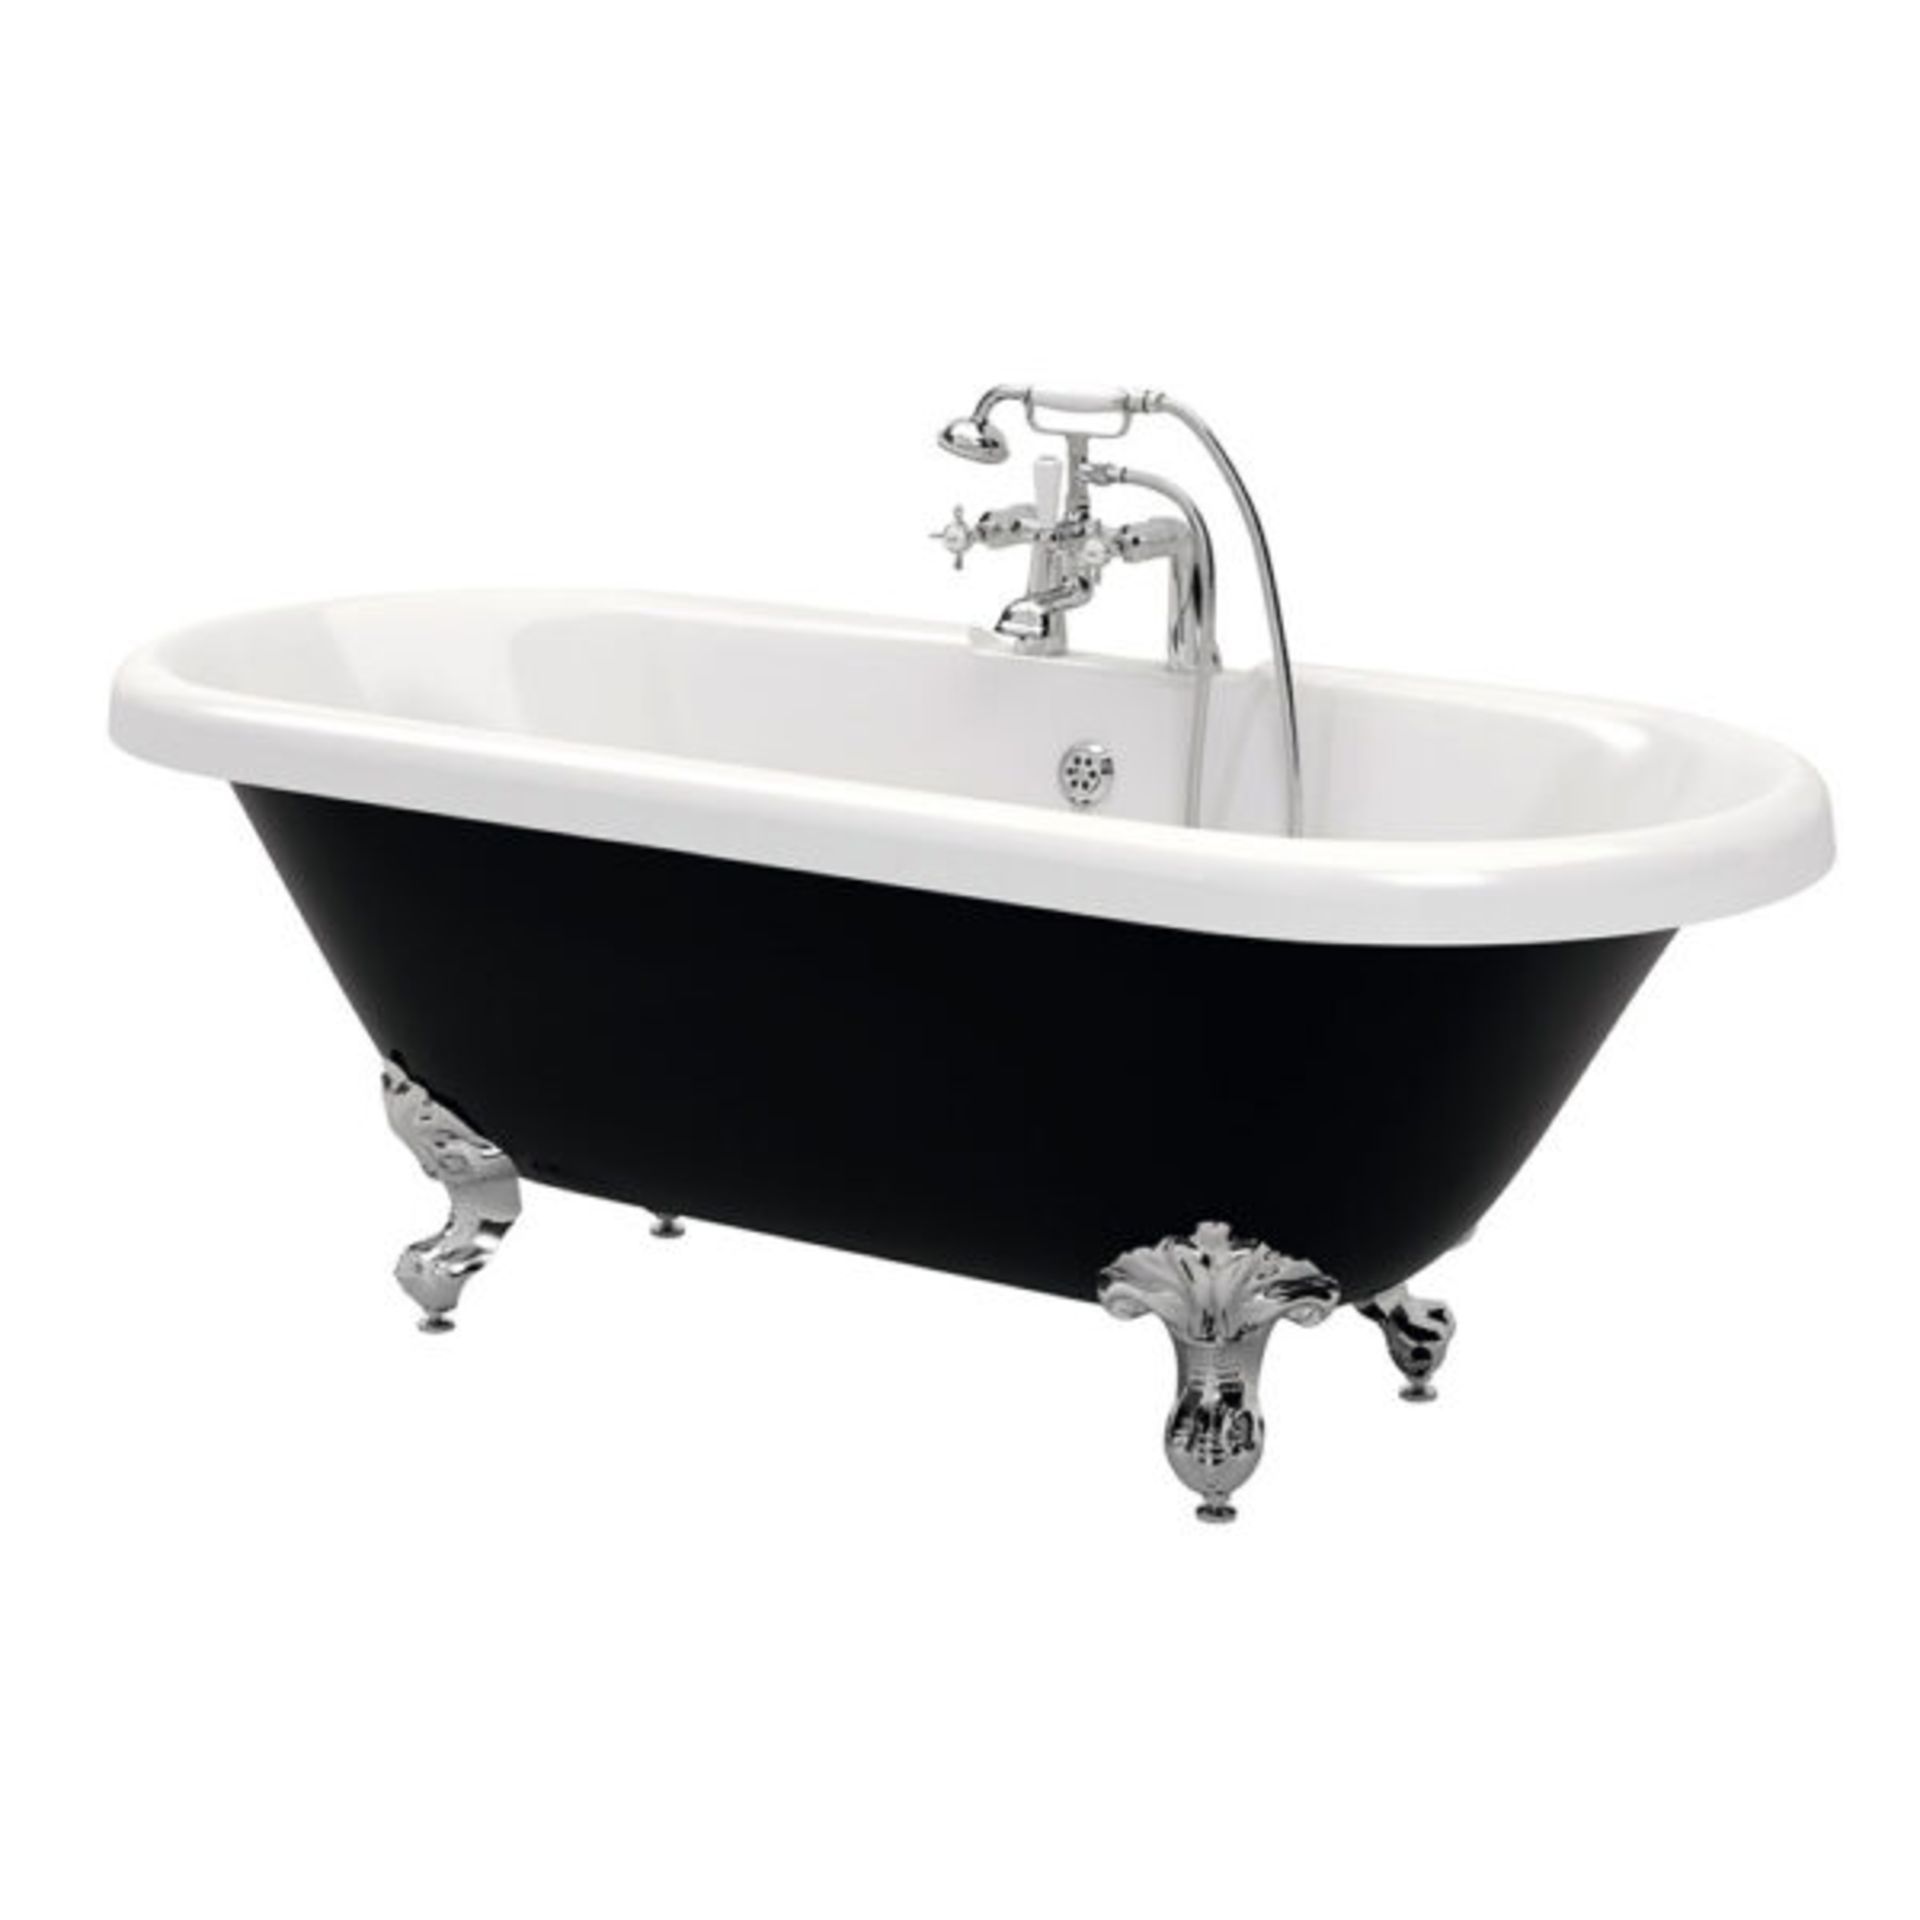 New (G3) 1690x740x620mm RICHMOND BLACK ROLLER TOP FREESTANDING BATH. RRP £1,049.With Chrome ... - Image 2 of 2